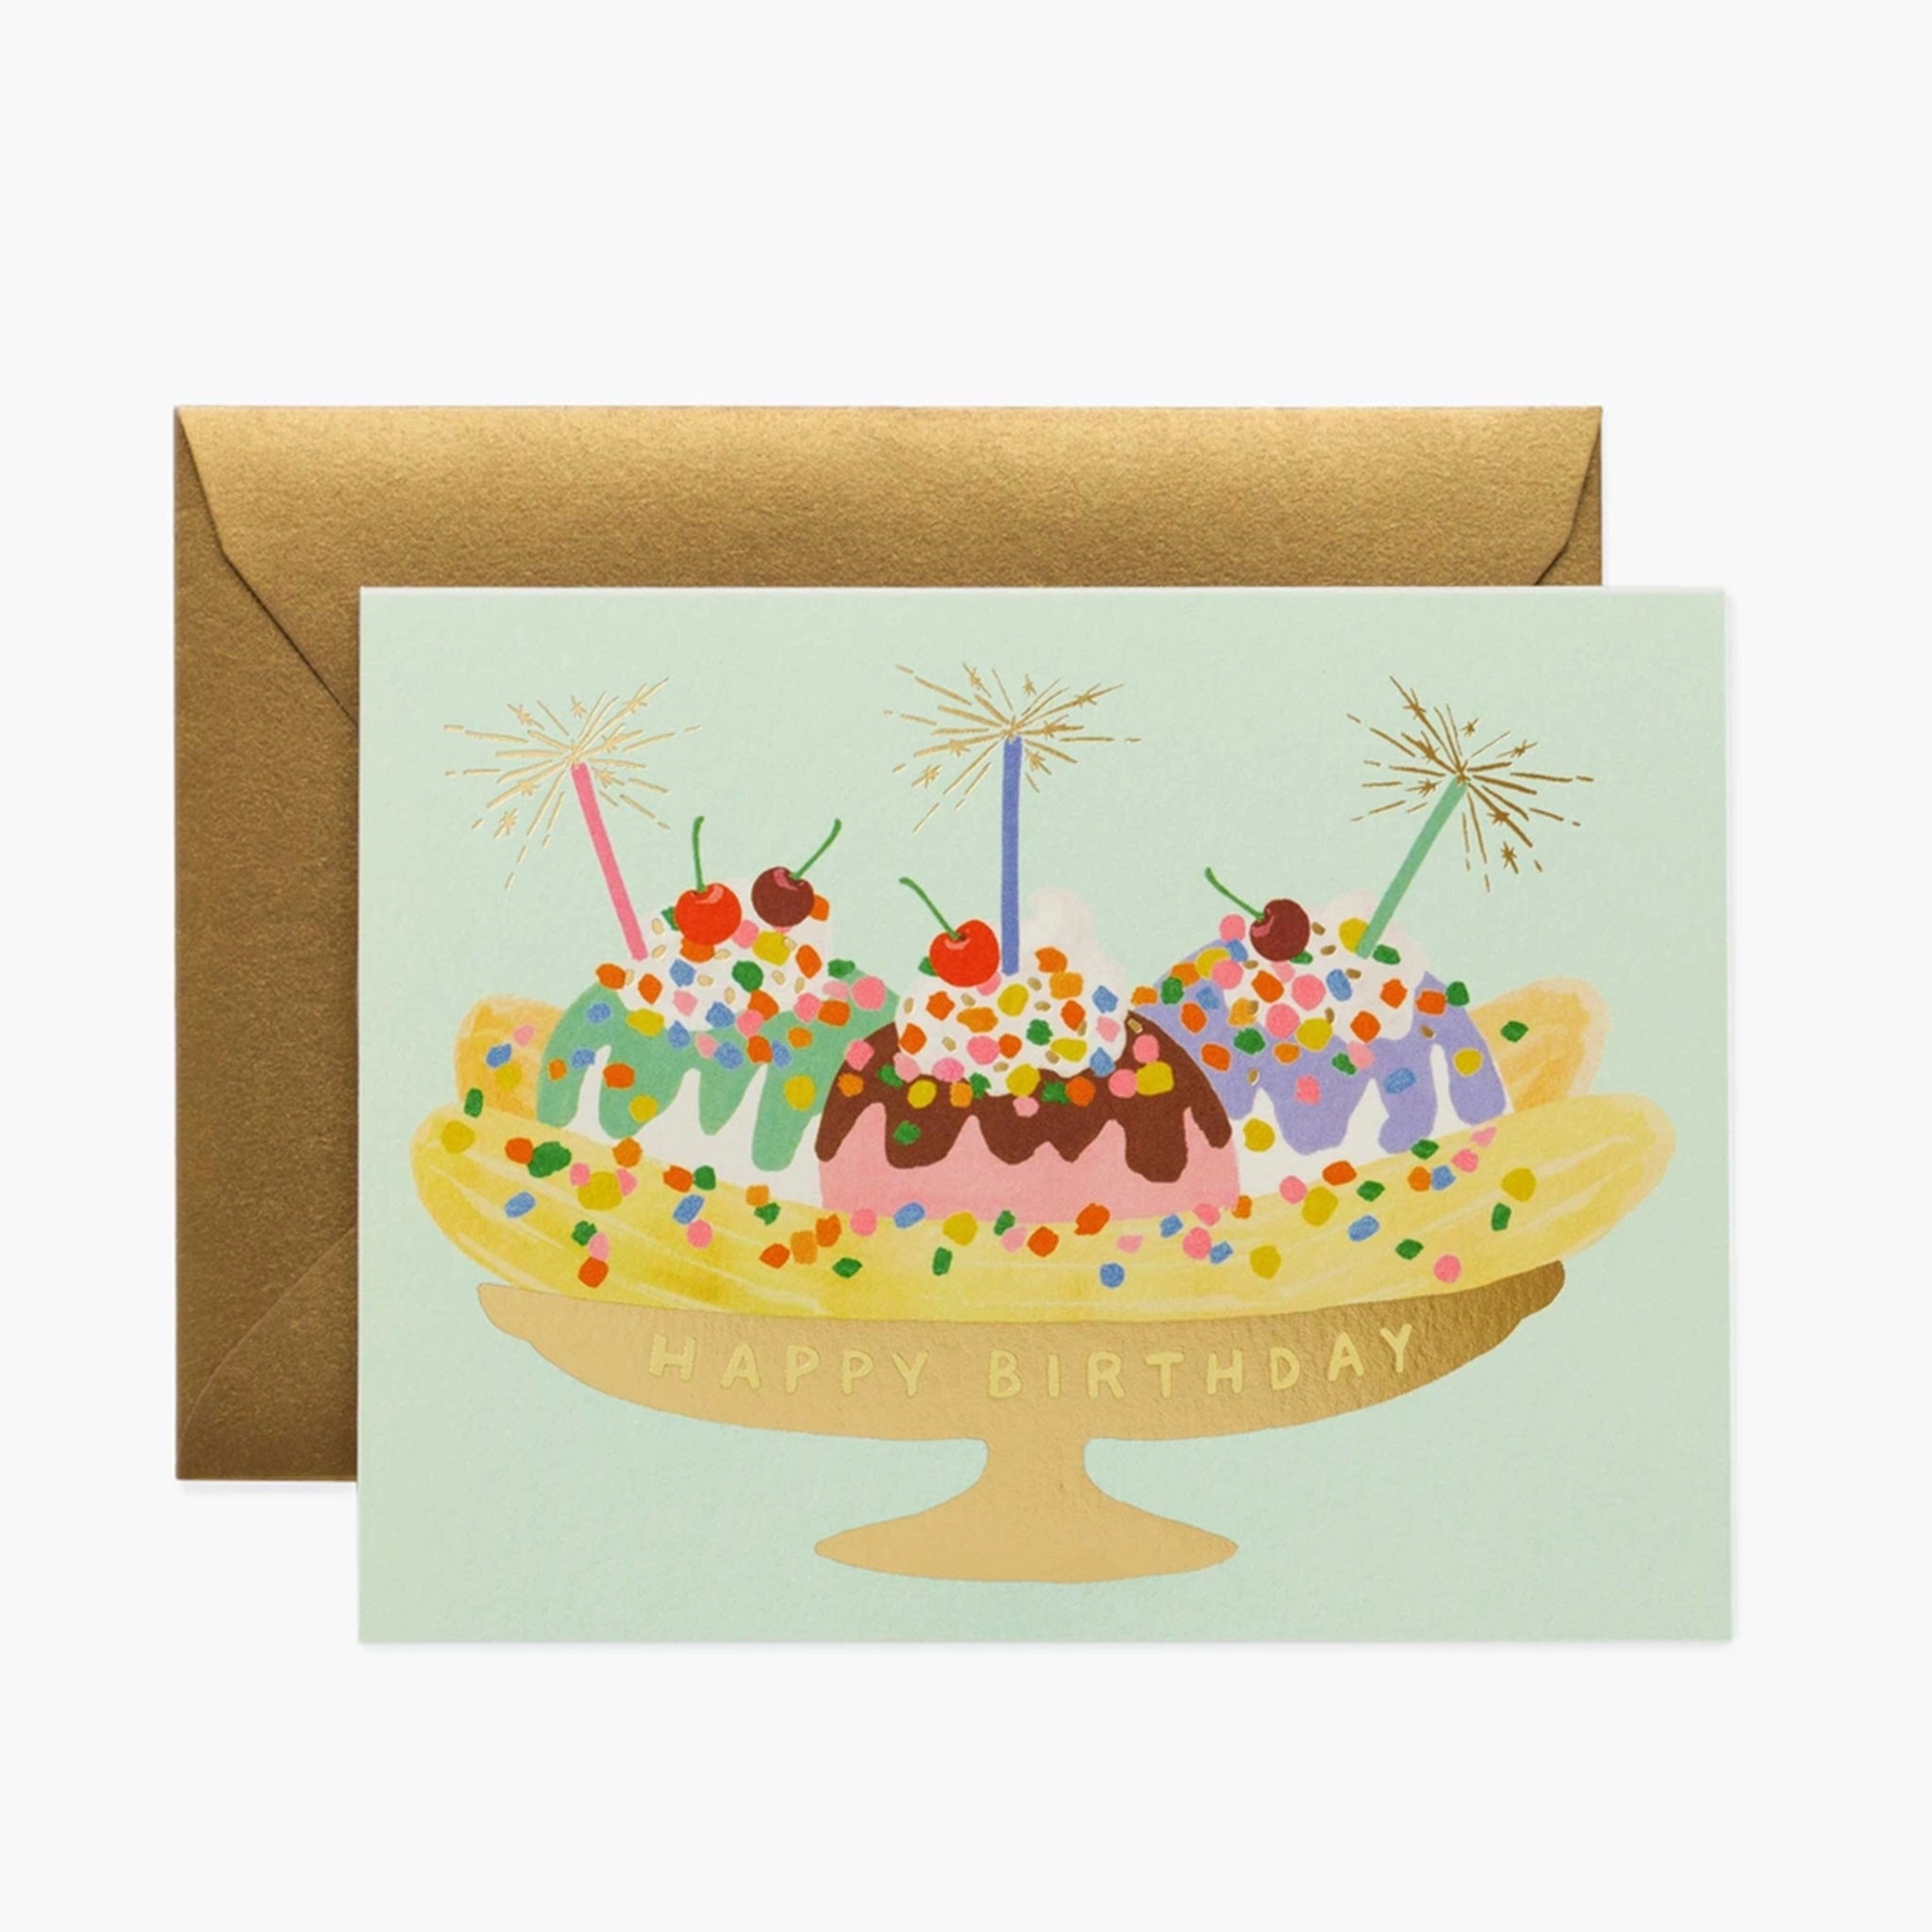 On a white background is a mint green birthday card with an illustration of a banana split along with gold foiled text that reads, &quot;Happy Birthday&quot;.